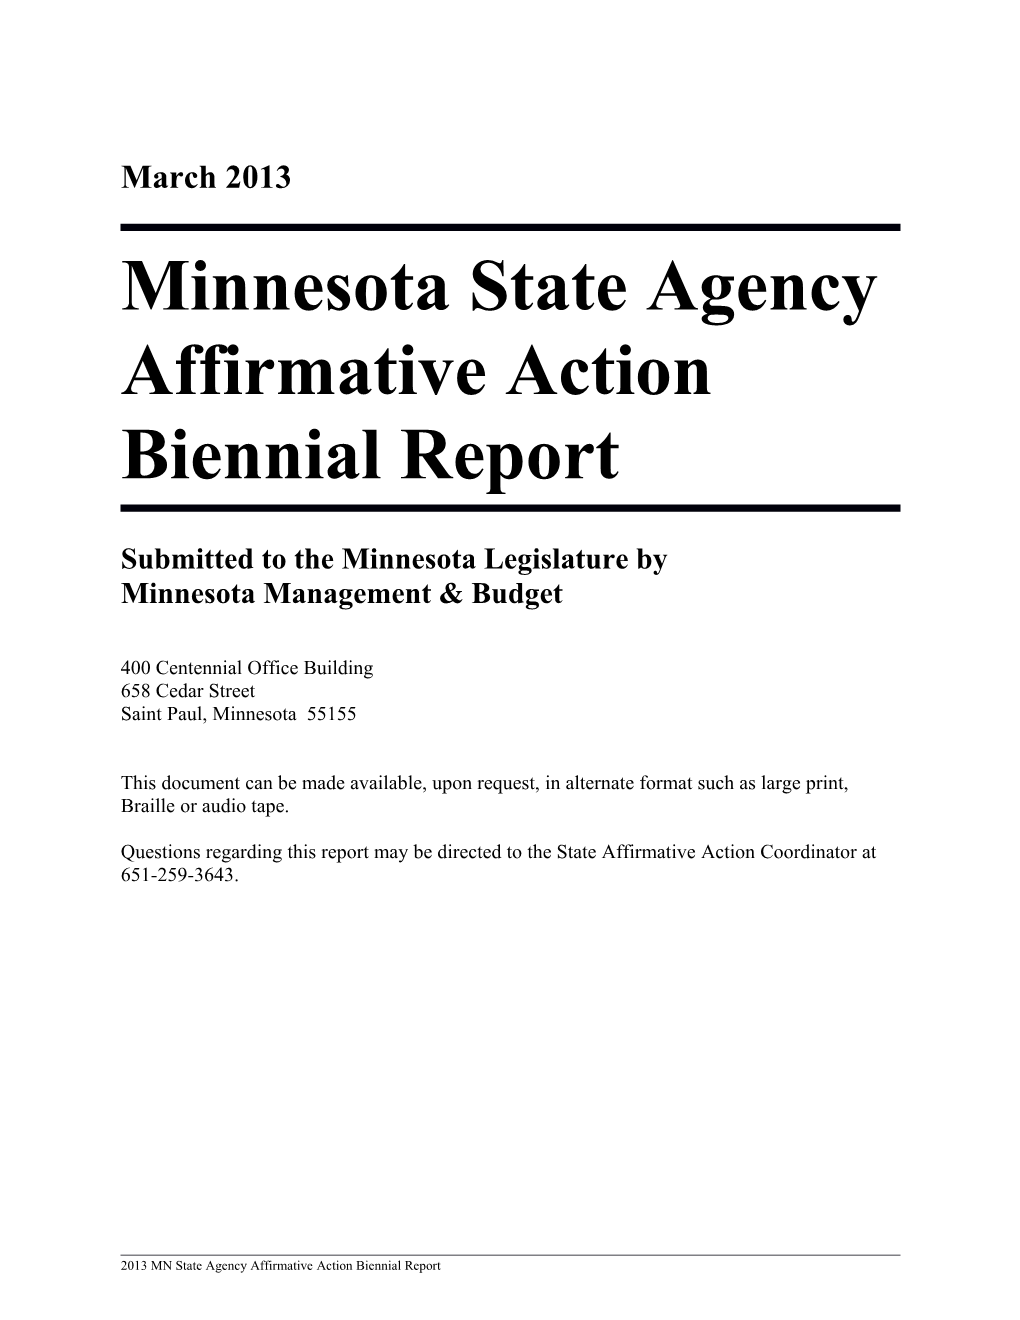 Minnesota State Agency Affirmative Action